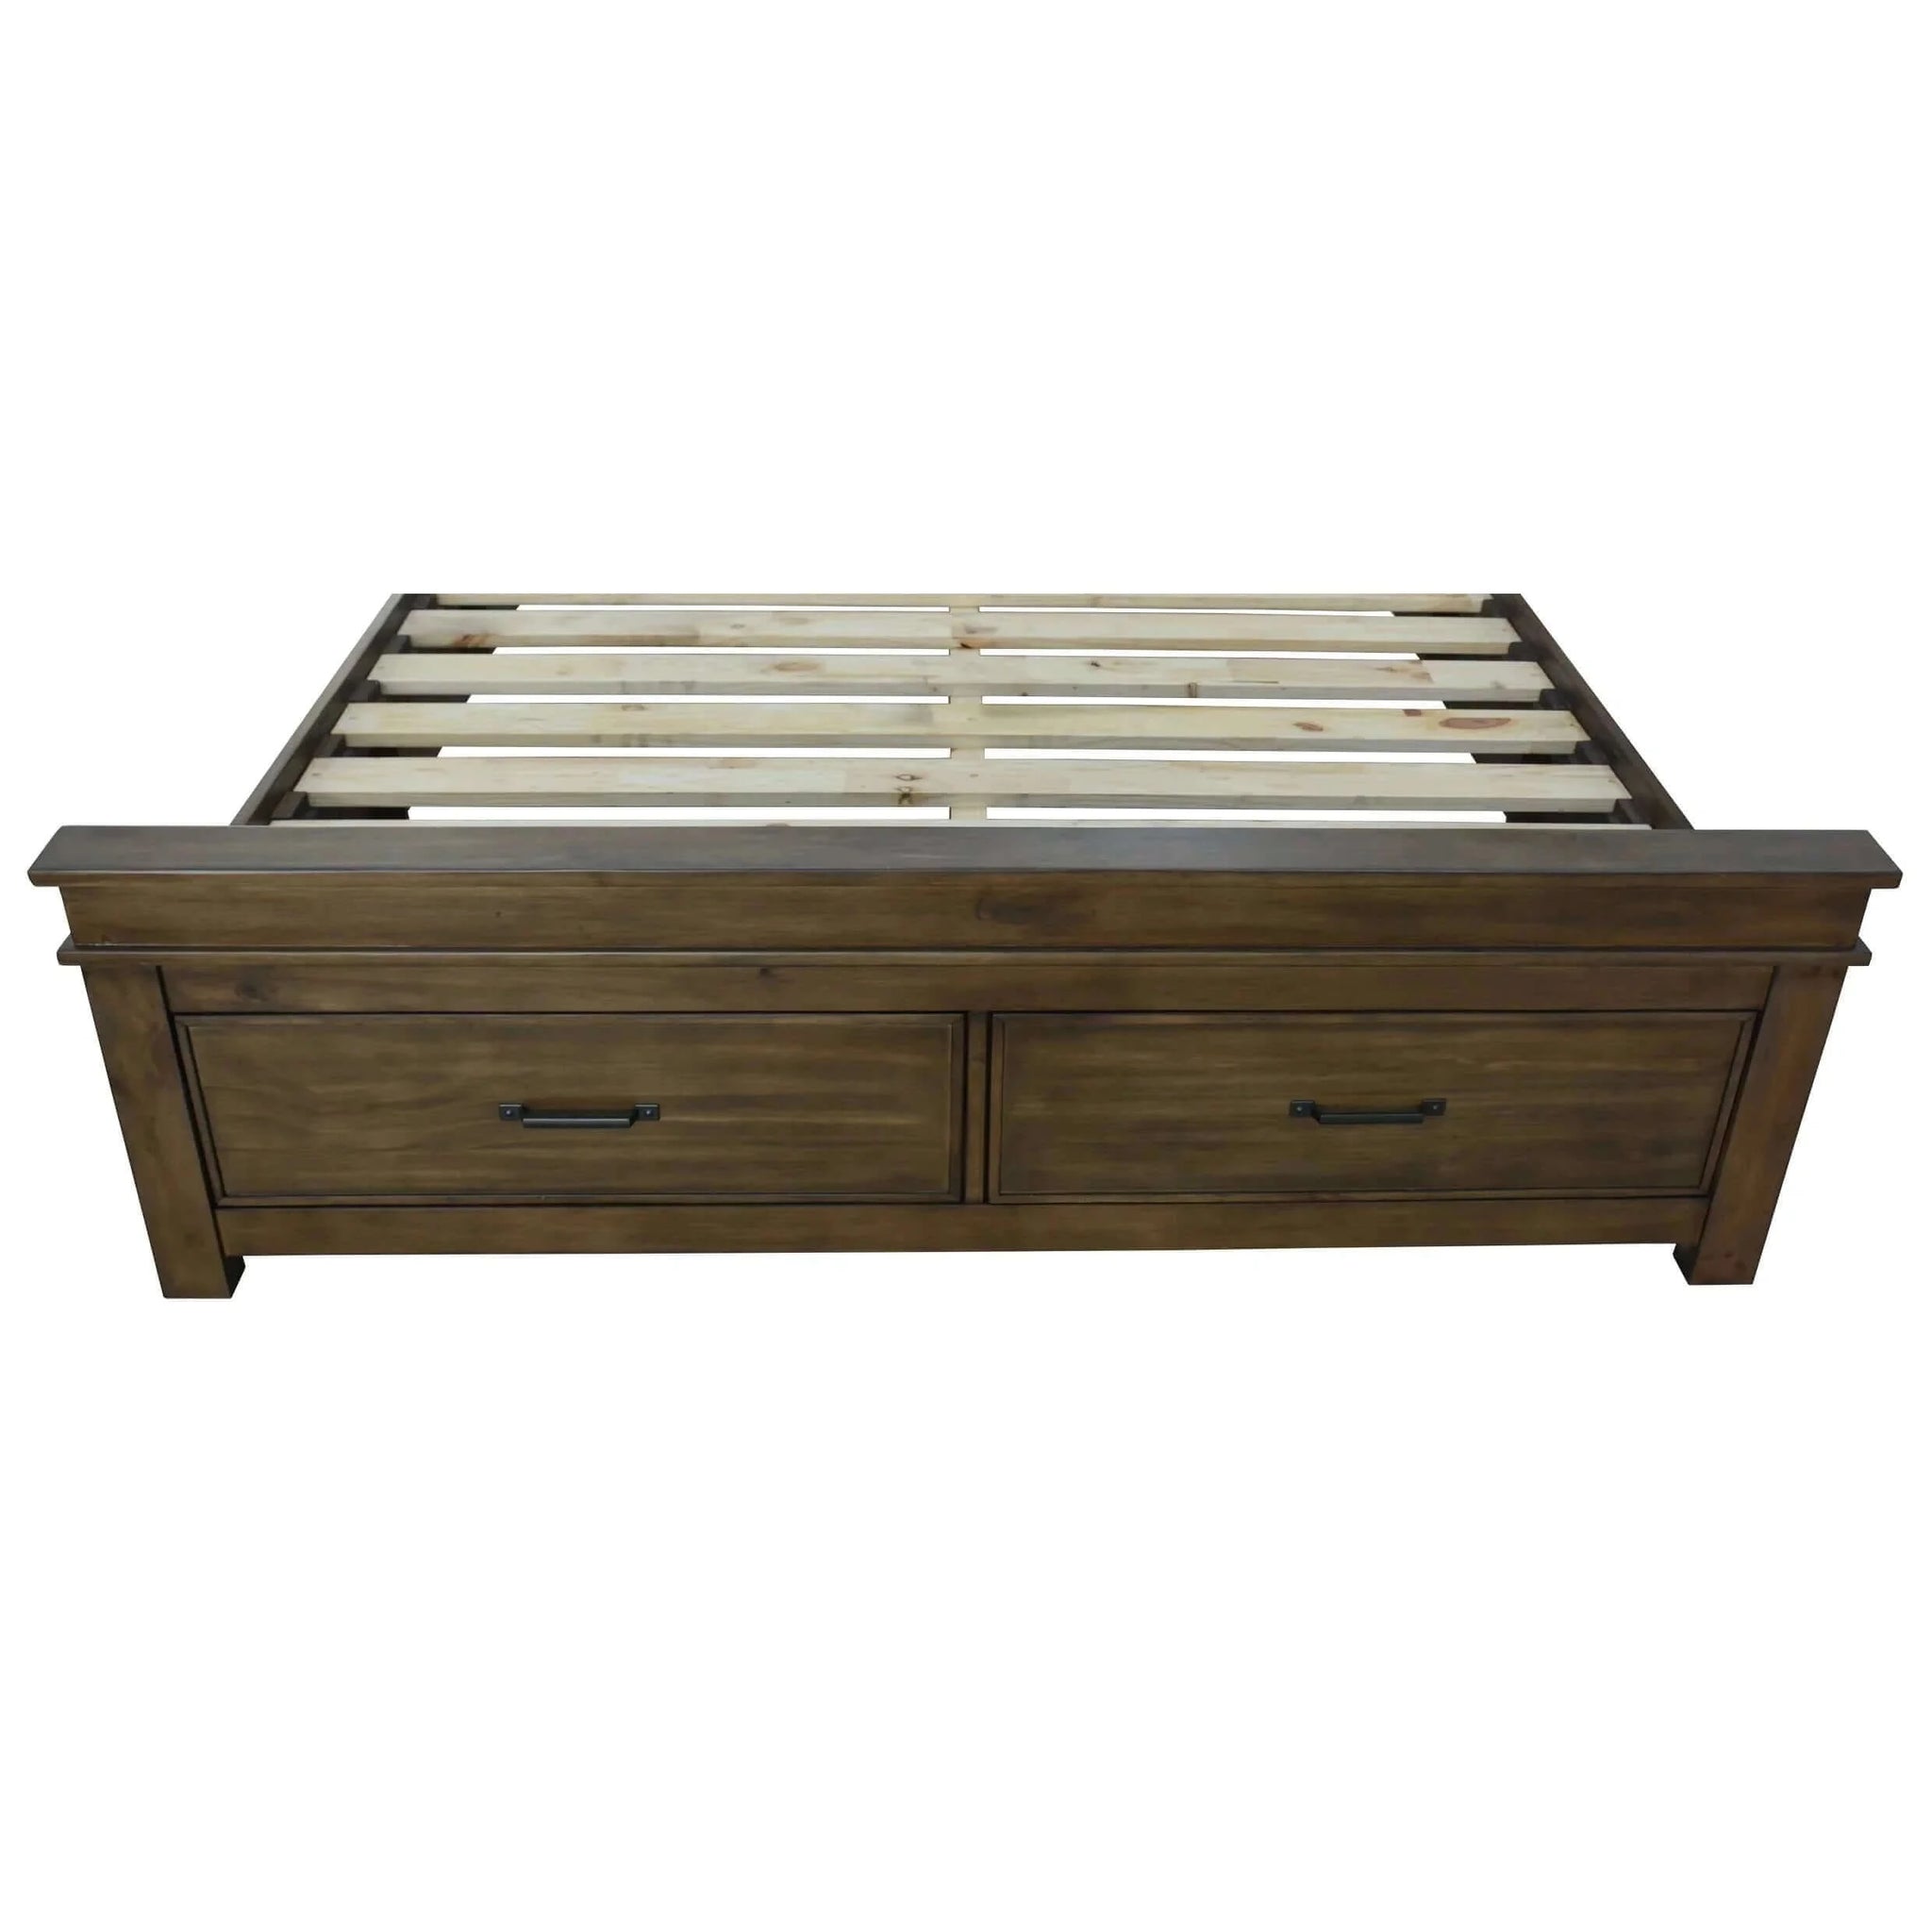 Buy lily bed frame king size timber mattress base with storage drawers - rustic grey - upinteriors-Upinteriors